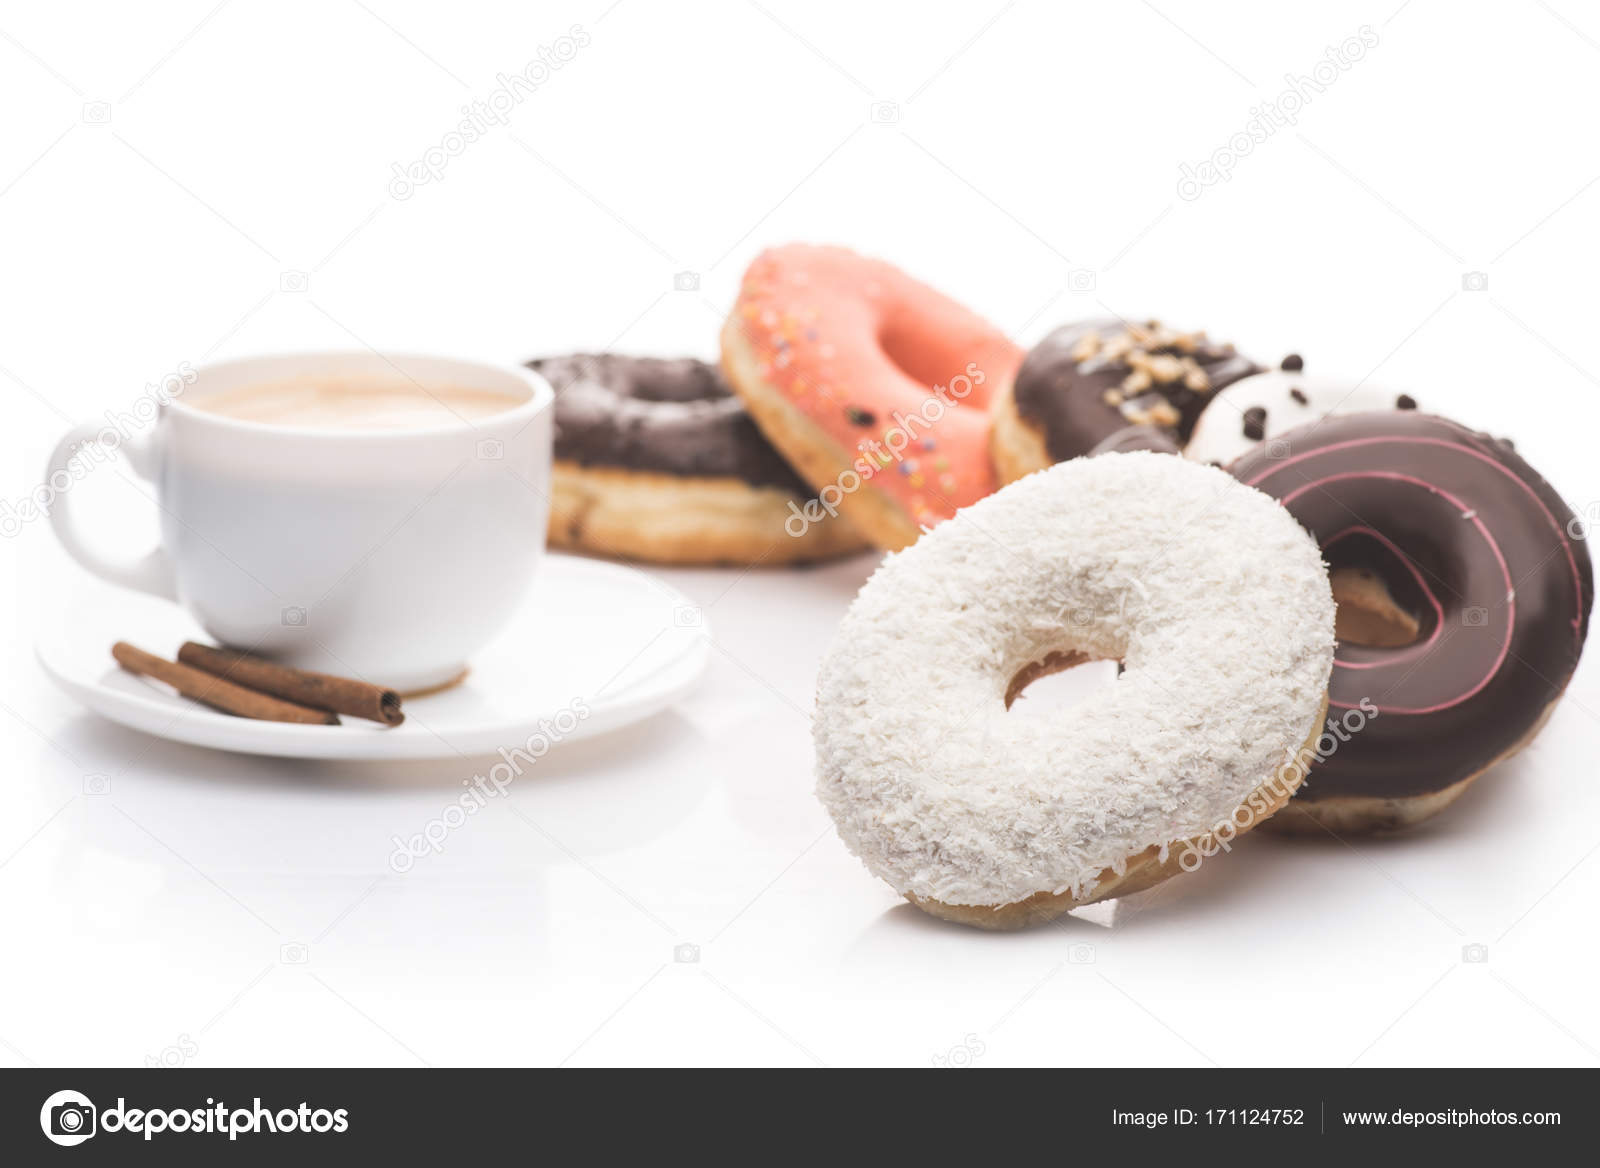 TOMBE LA NEIGE! - Page 24 Depositphotos_171124752-stock-photo-doughnuts-and-cup-of-coffee